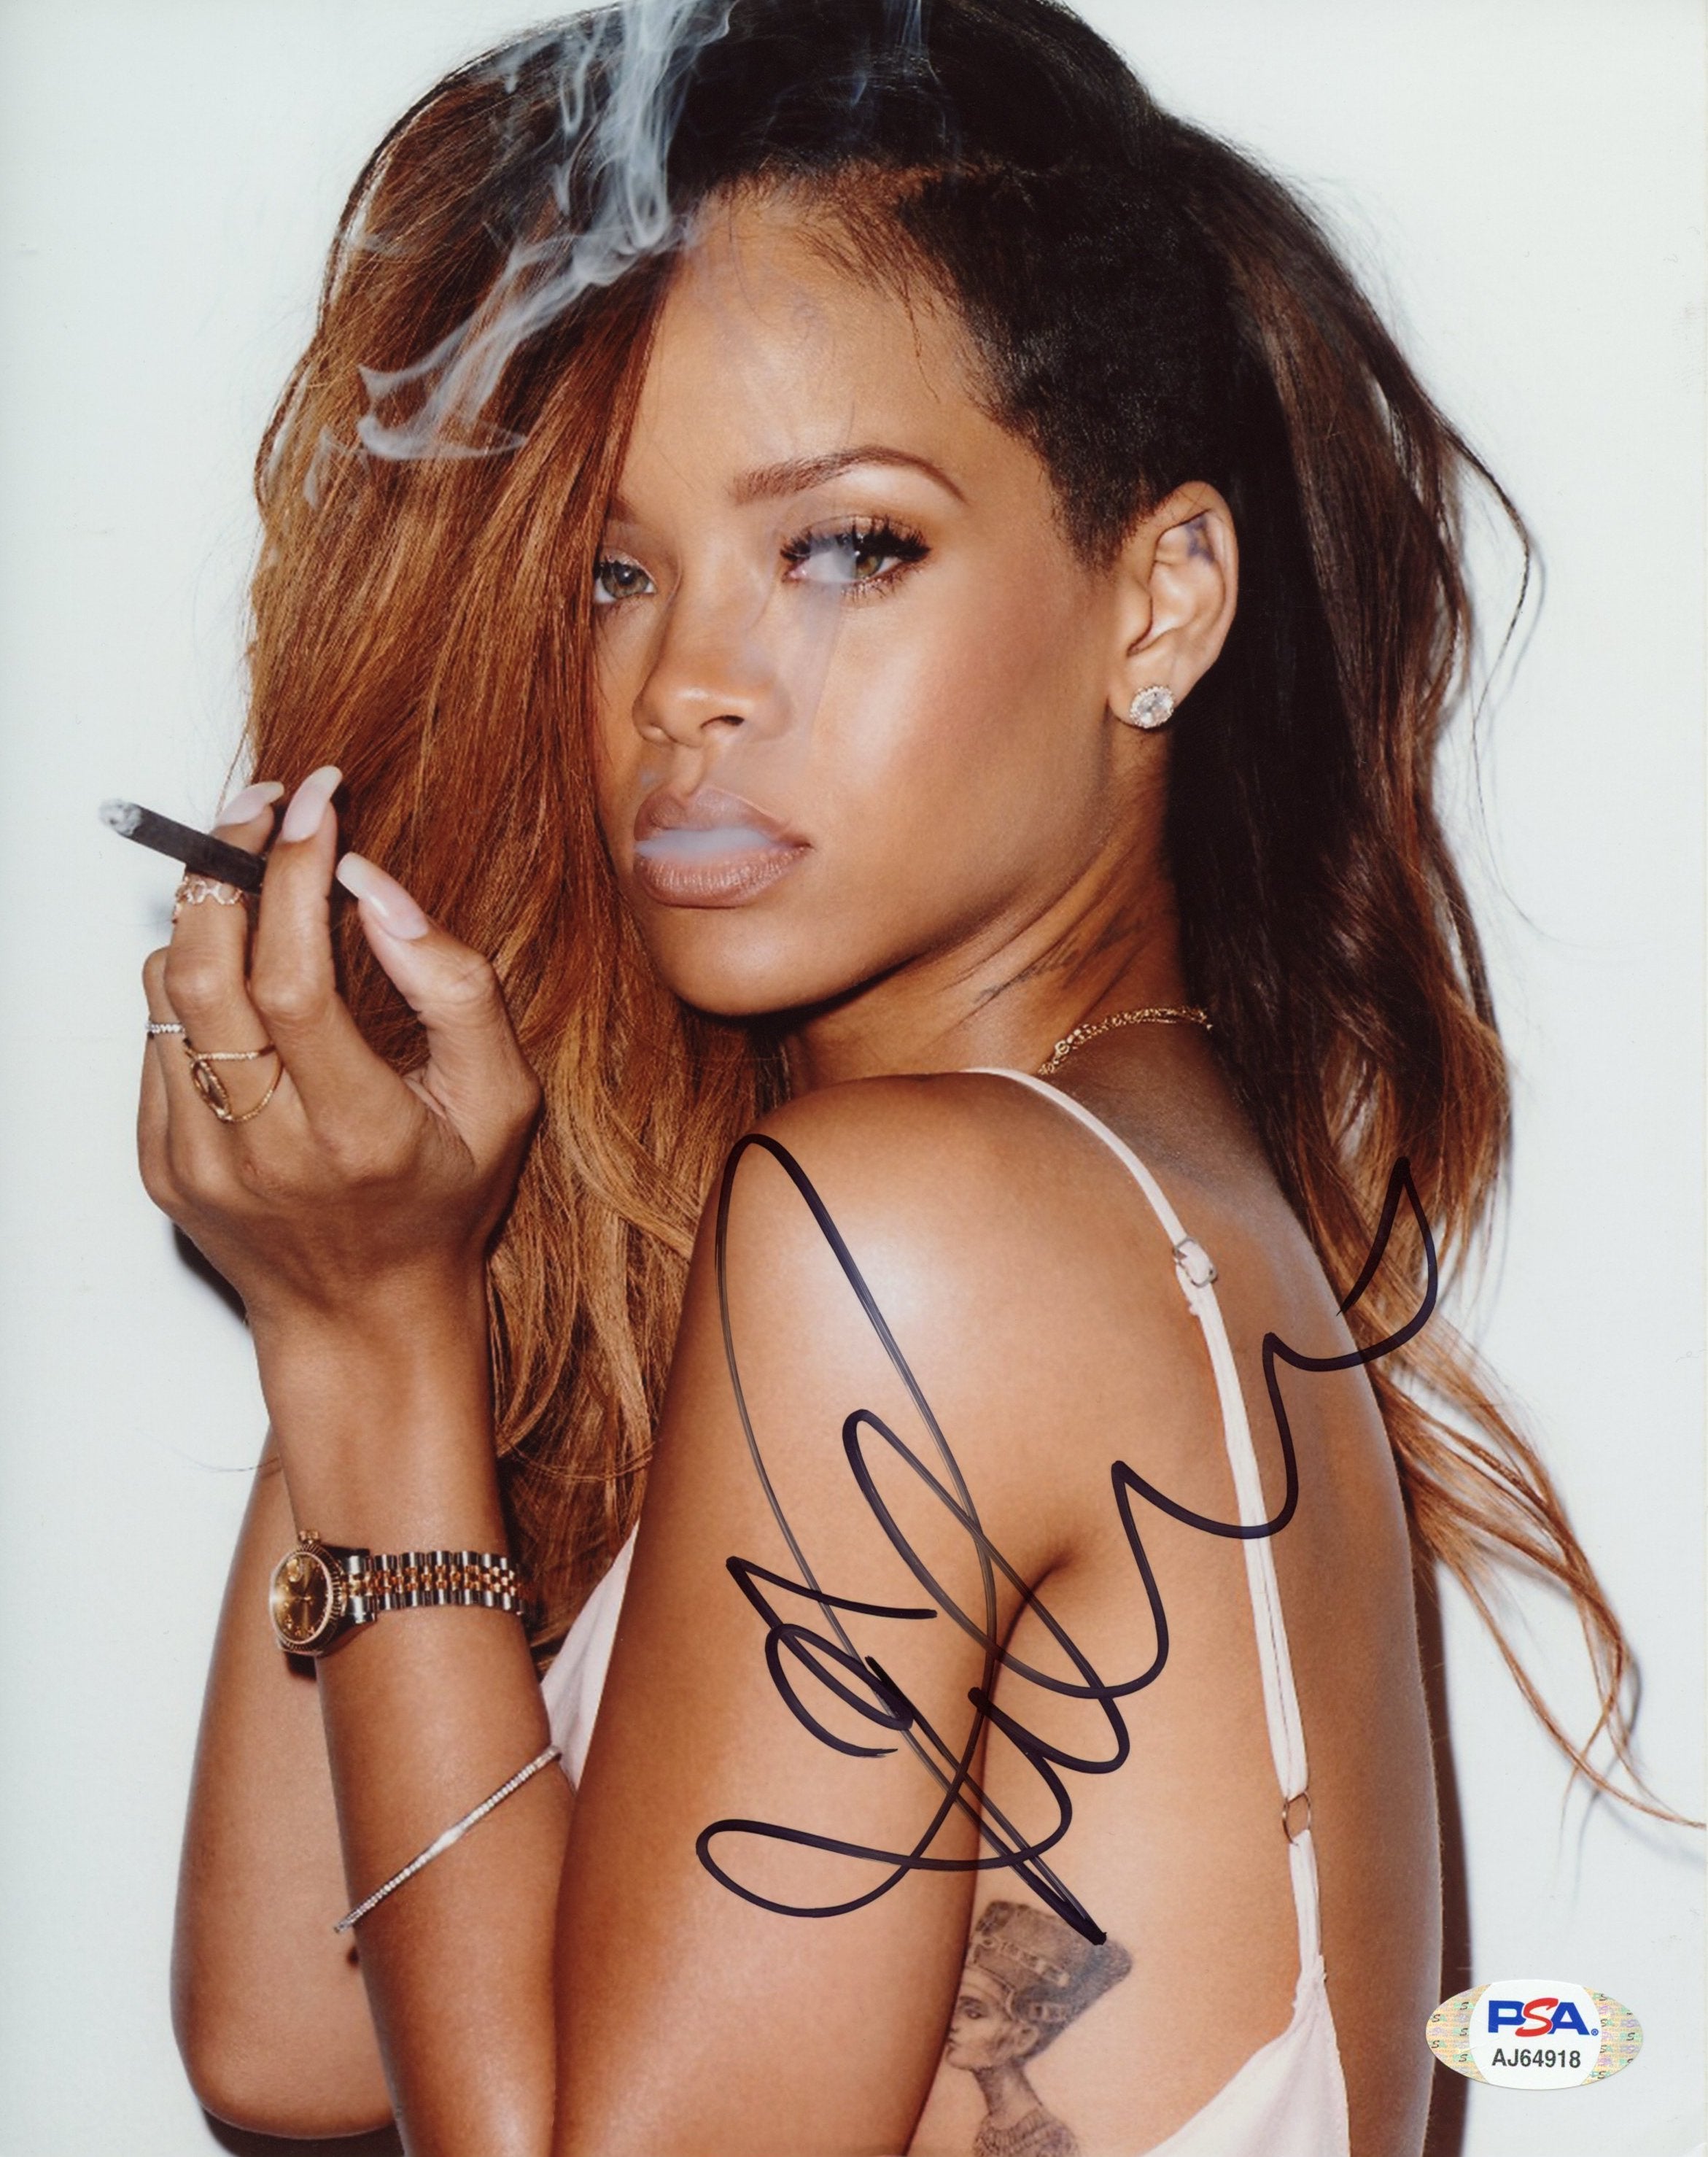 Rihanna Signed Autographed 8x10 Photo PSA/DNA Authenticated